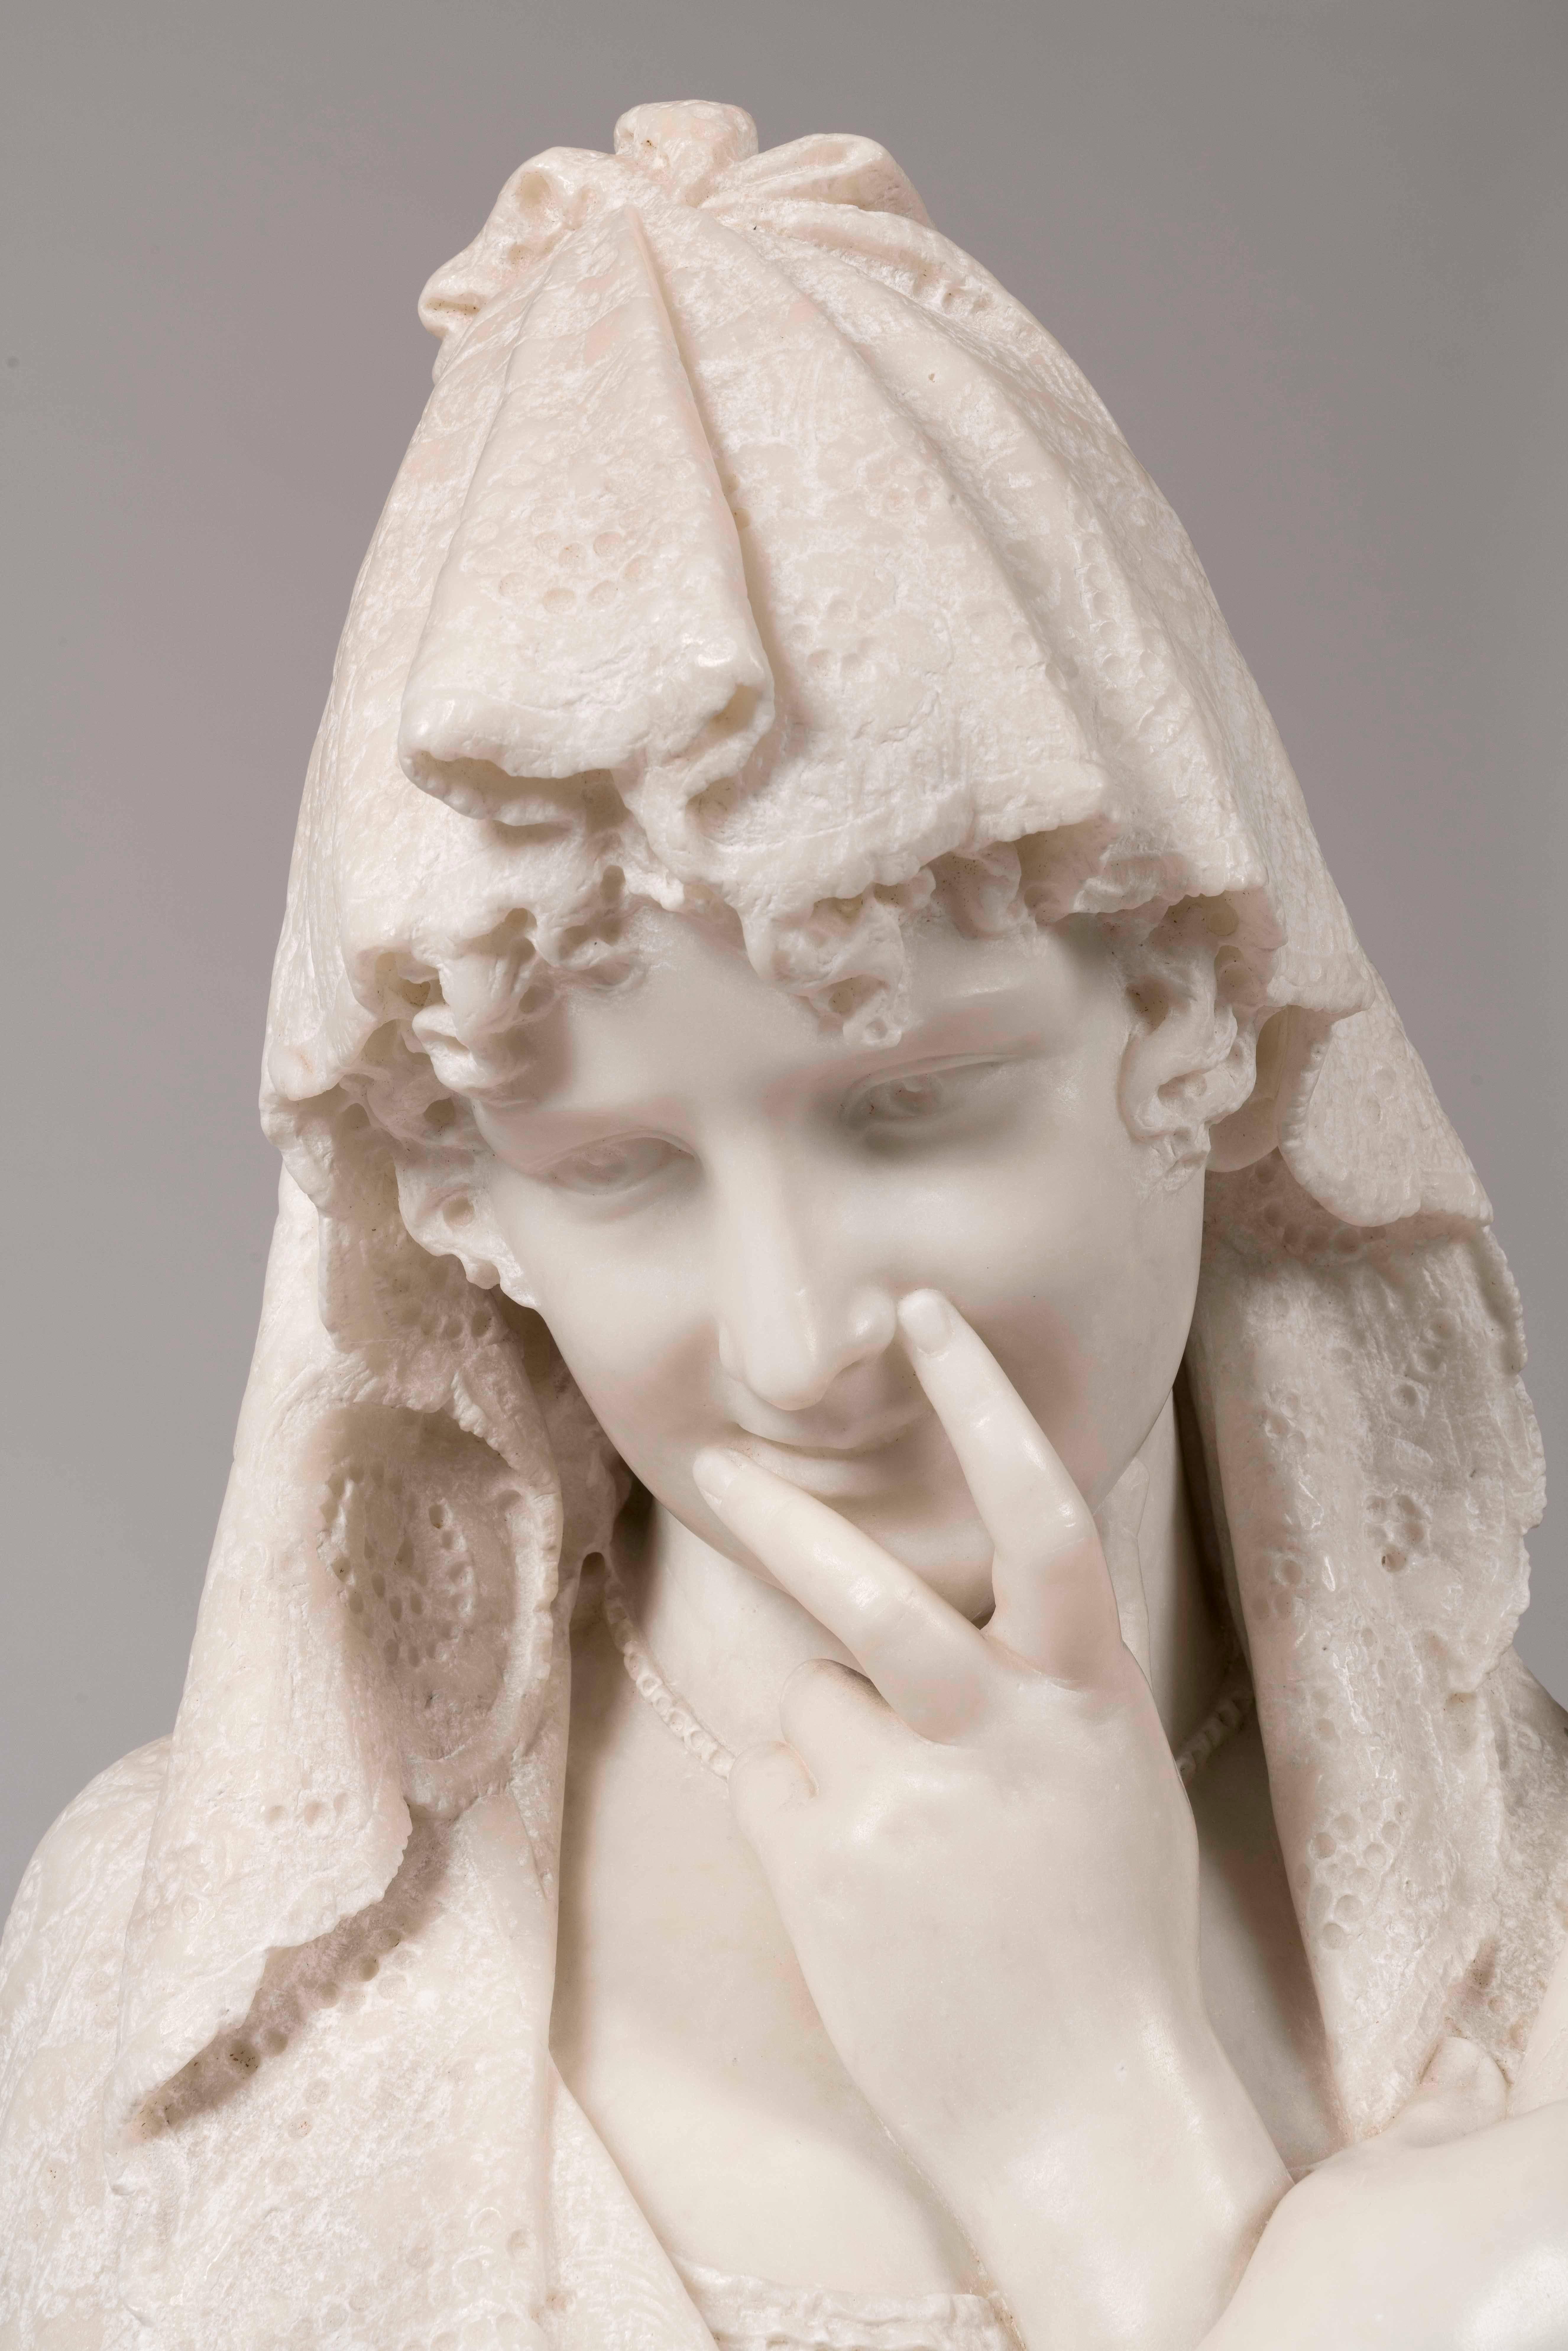 A Carrara marble bust of a shy maiden
Signed C Lapini, Firenze

Rising from a circular waisted socle, the maiden holds a fan, and coyly covers her smile with her hand; her lacework mantilla covers her head and shoulders, and is draped over the